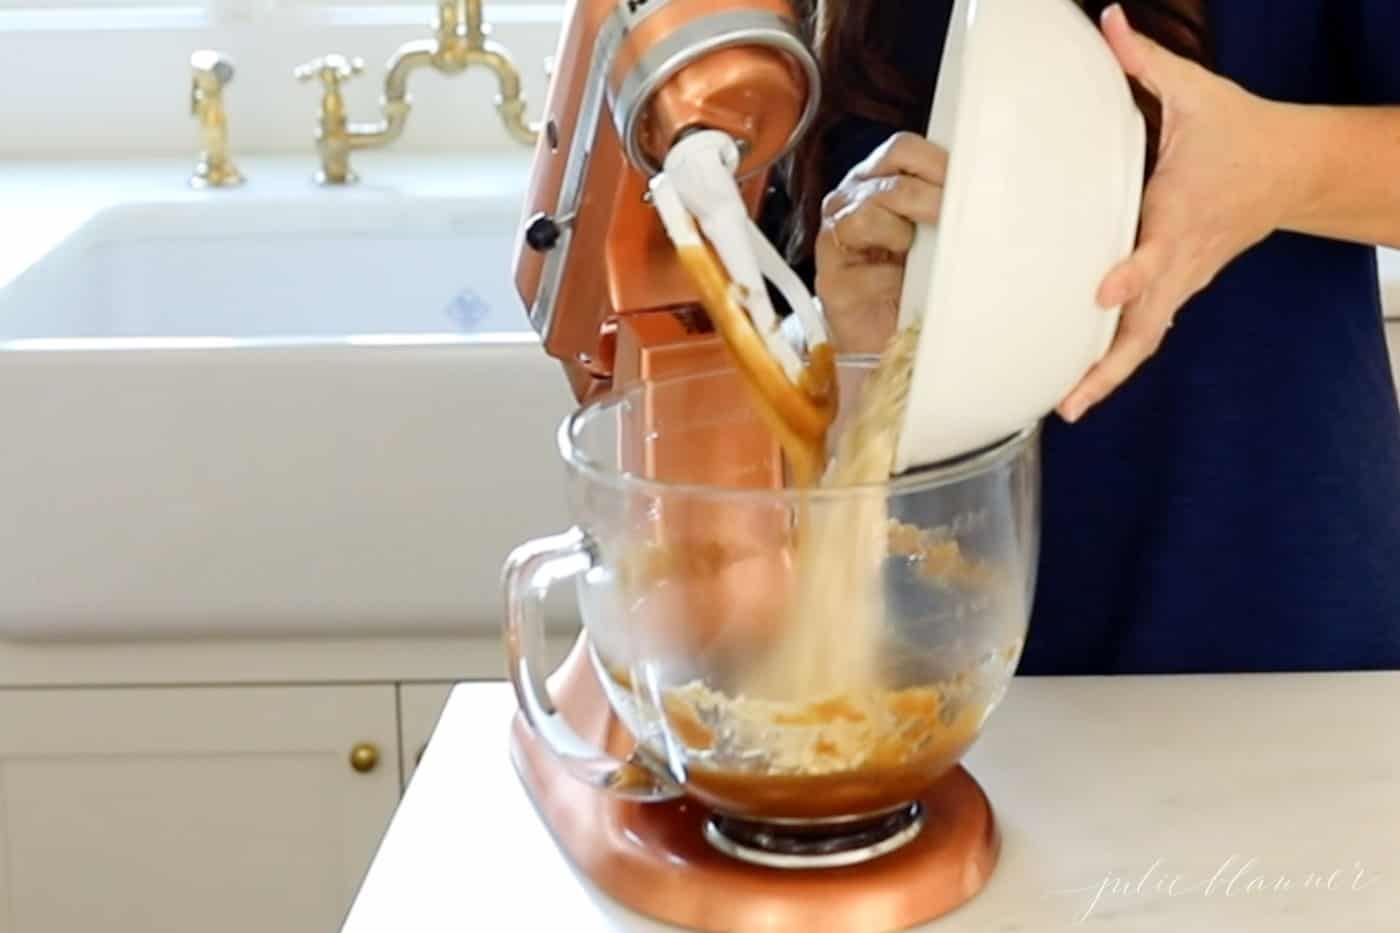 A woman in a navy dress standing behind a copper stand mixer making oatmeal lace cookies.